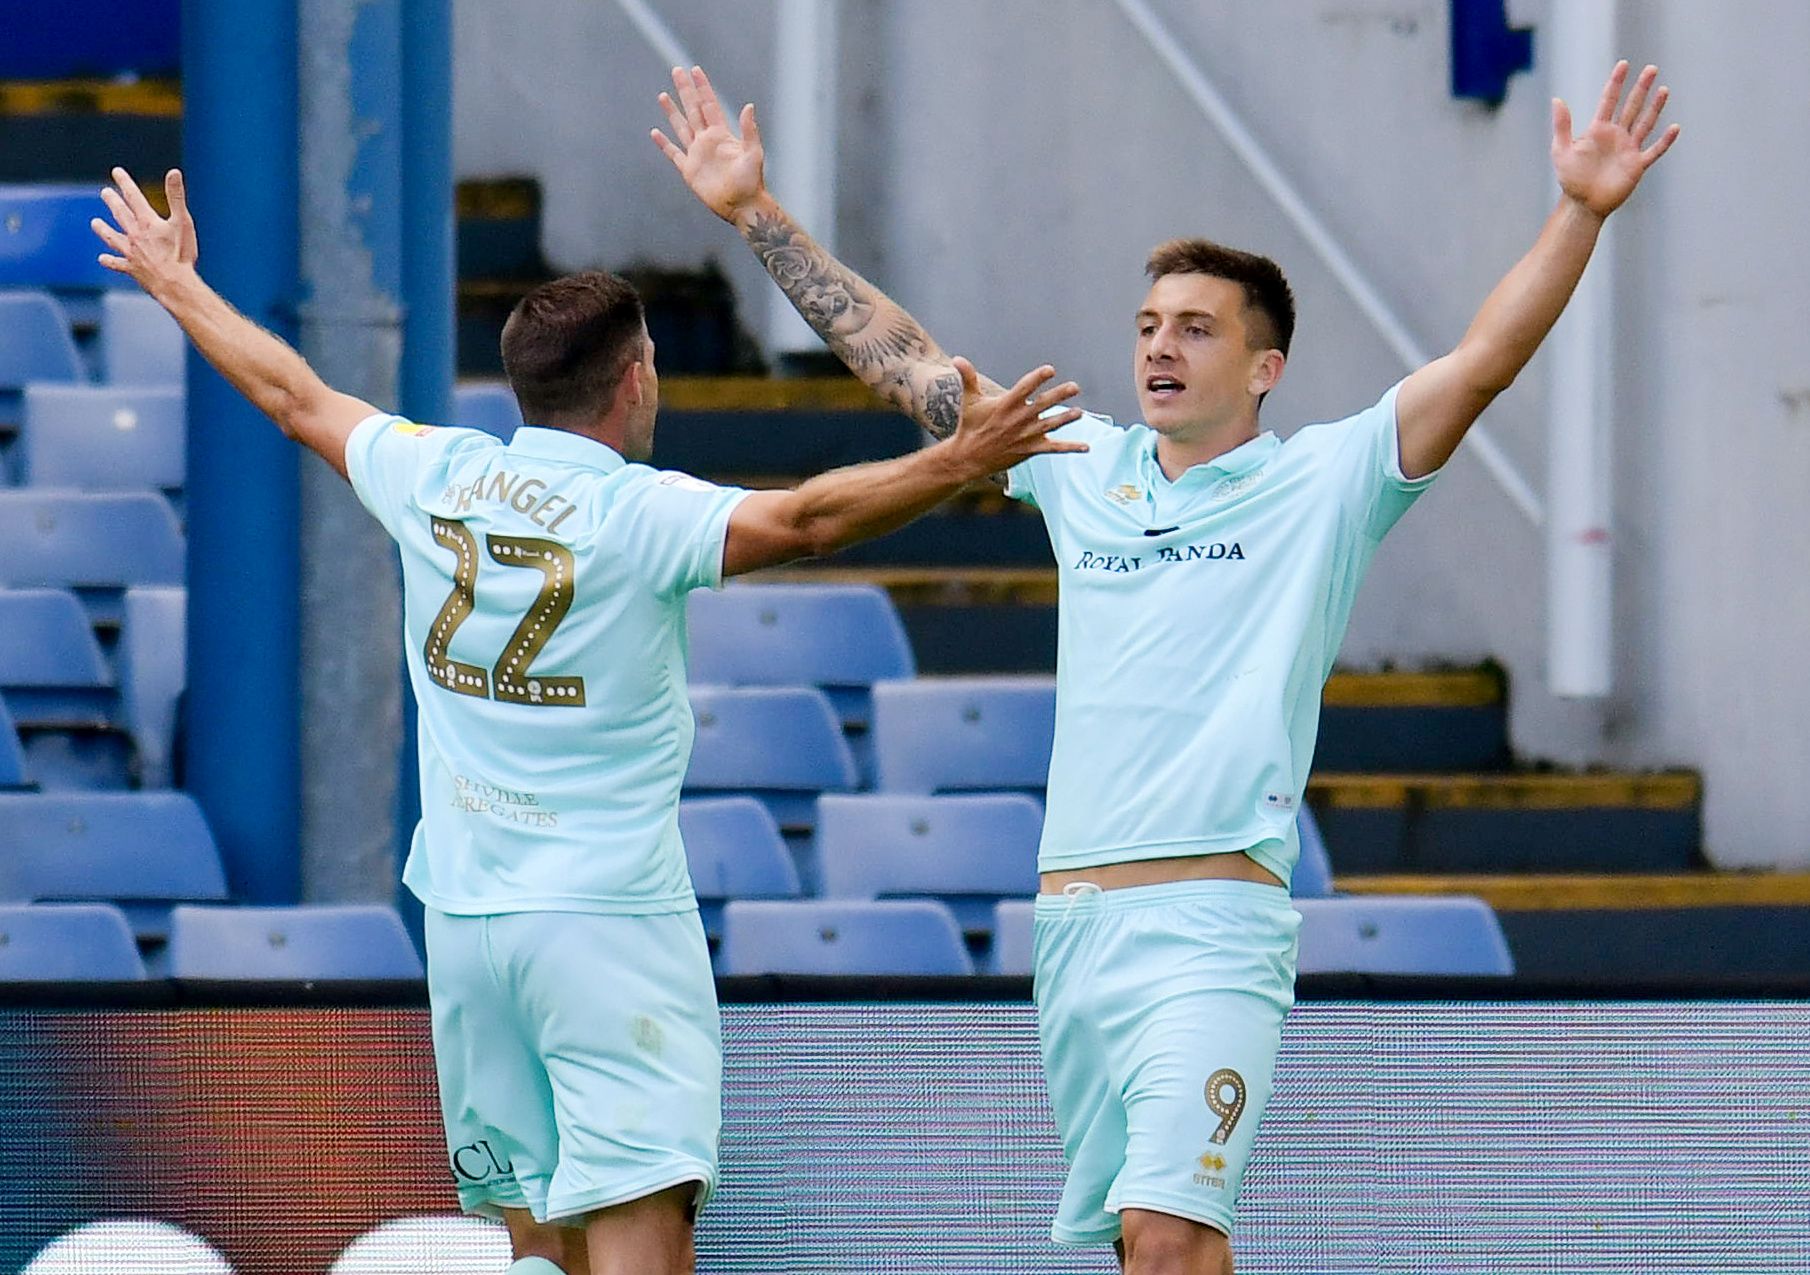 Soccer Football - Championship - Sheffield Wednesday v Queens Park Rangers - Hillsborough, Sheffield, Britain - August 31, 2019   Queens Park Rangers' Jordan Hugill celebrates scoring their first goal with Angel Rangel   Action Images/Paul Burrows    EDITORIAL USE ONLY. No use with unauthorized audio, video, data, fixture lists, club/league logos or "live" services. Online in-match use limited to 75 images, no video emulation. No use in betting, games or single club/league/player publications.  